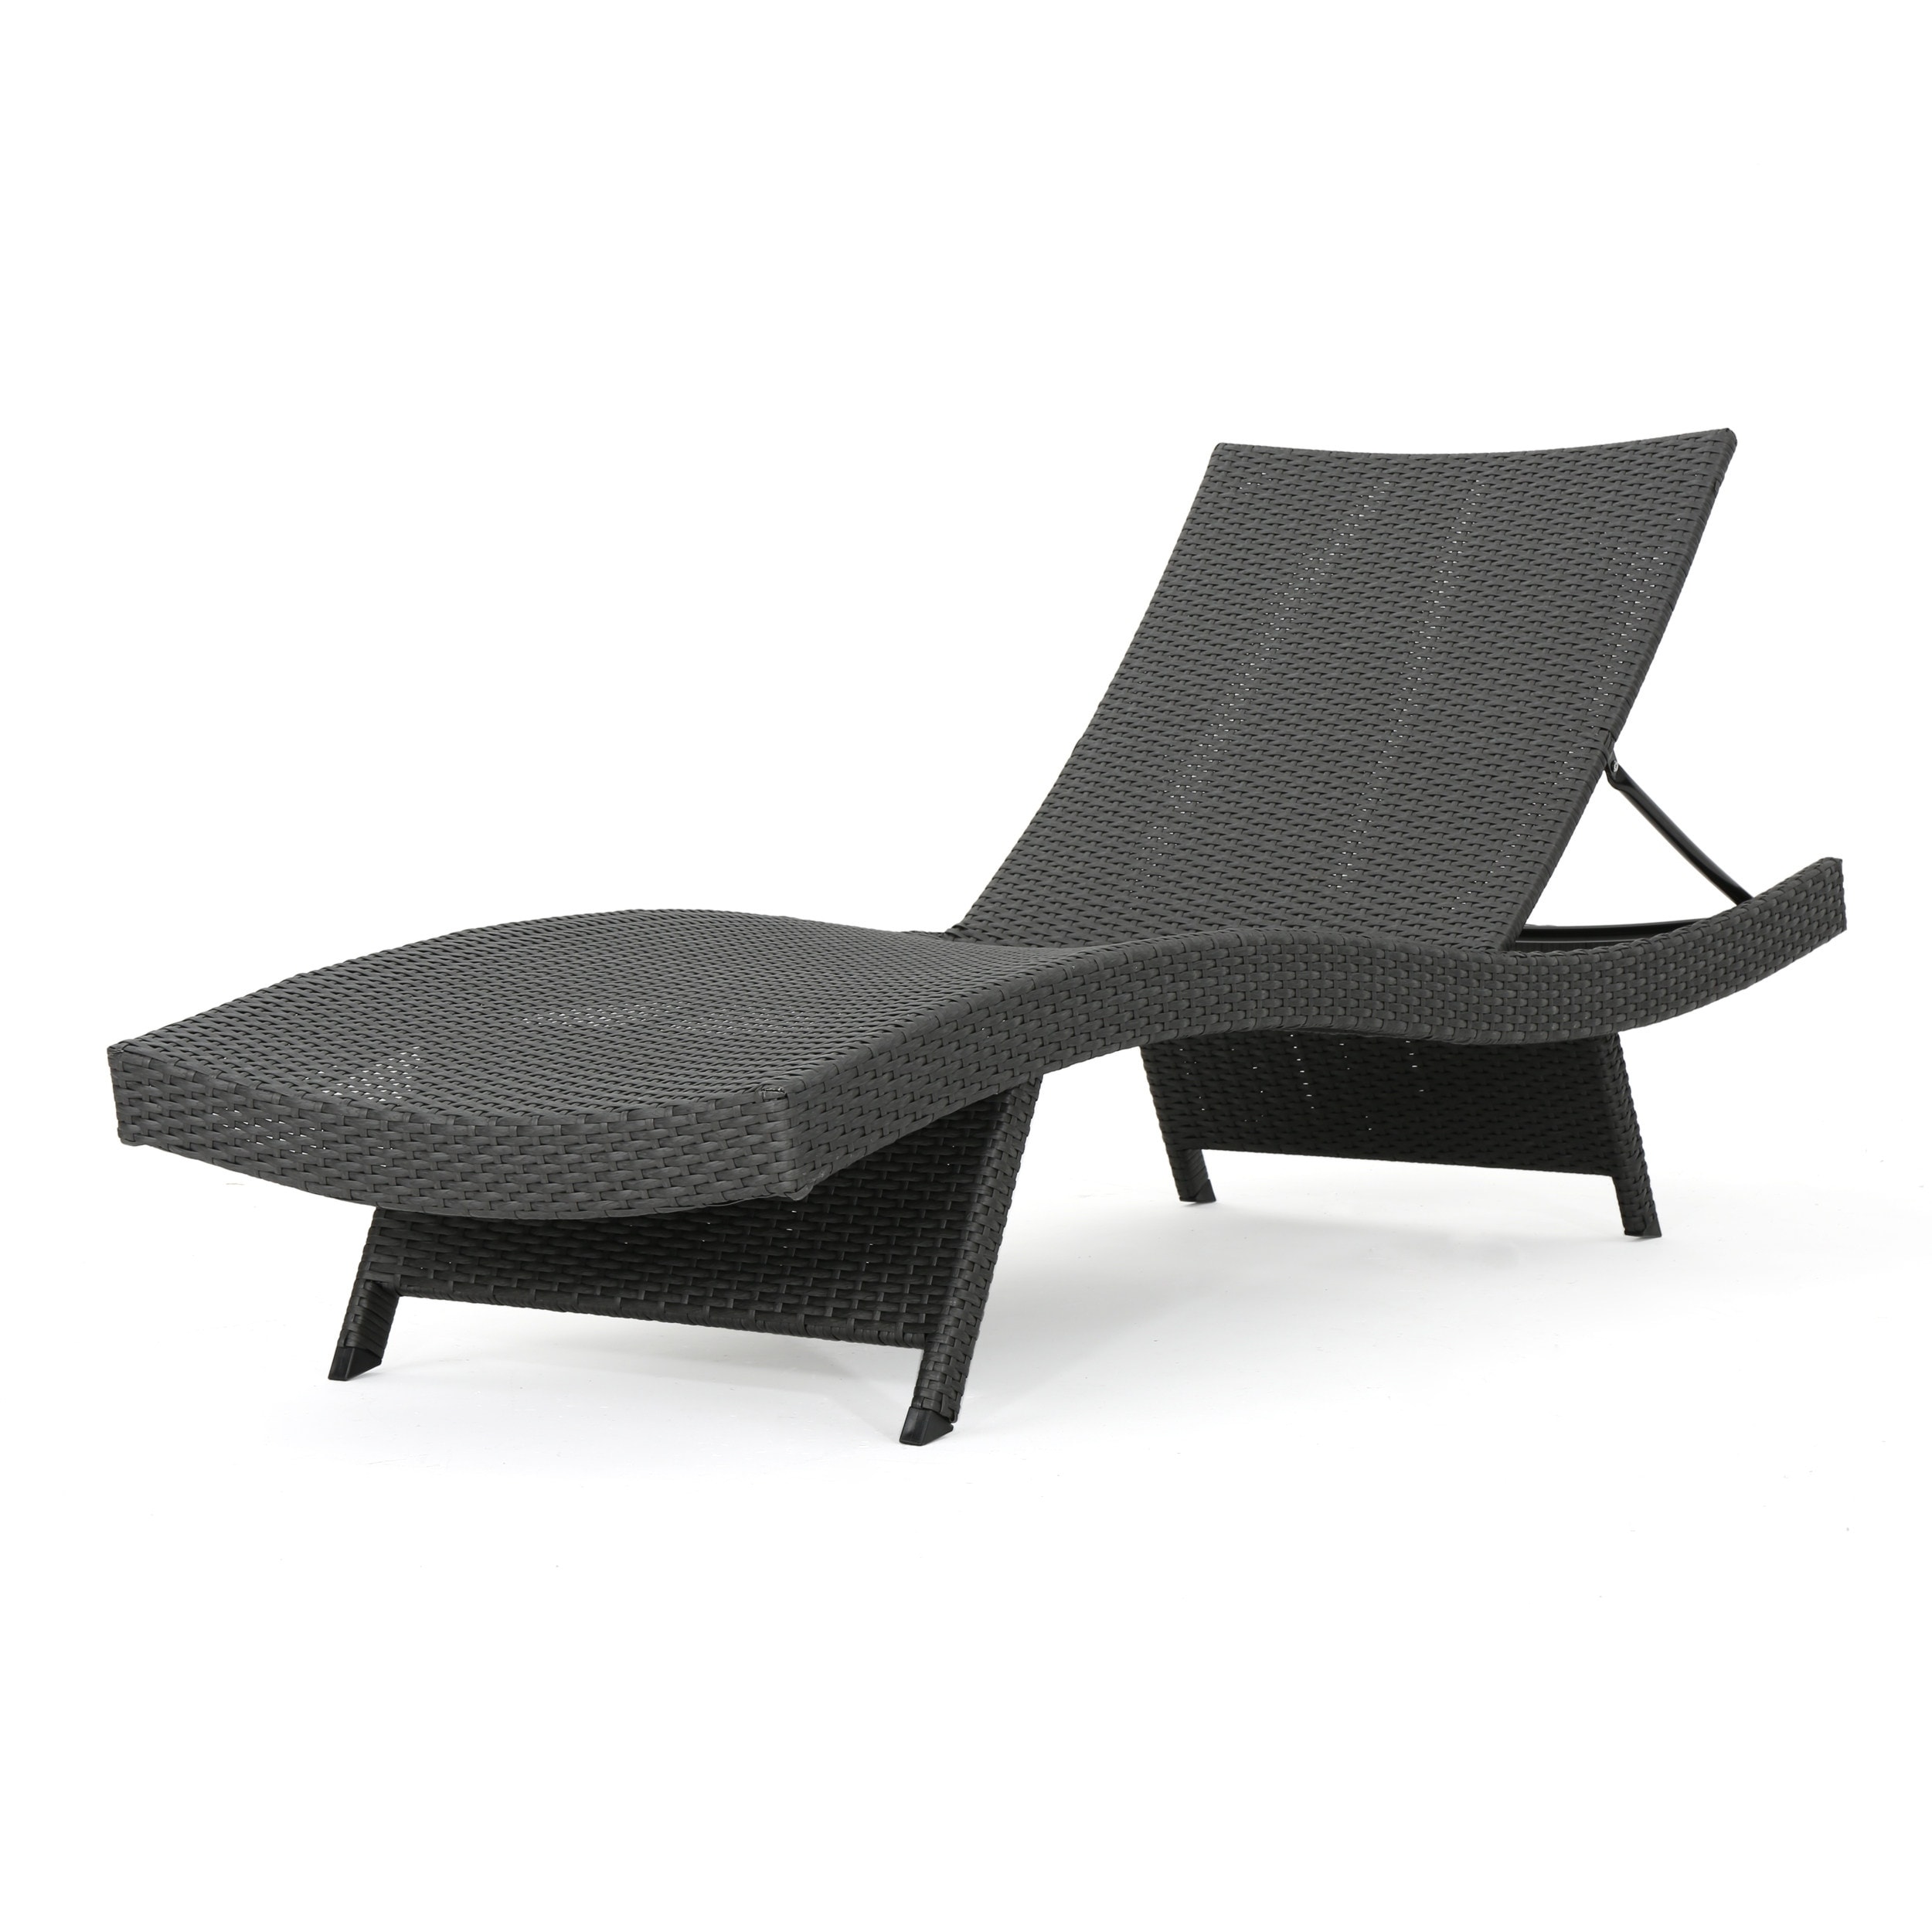 Christopher Knight Home Salem Outdoor Grey Wicker Chaise Lounge Chair  by  Brown No Cover - image 4 of 5